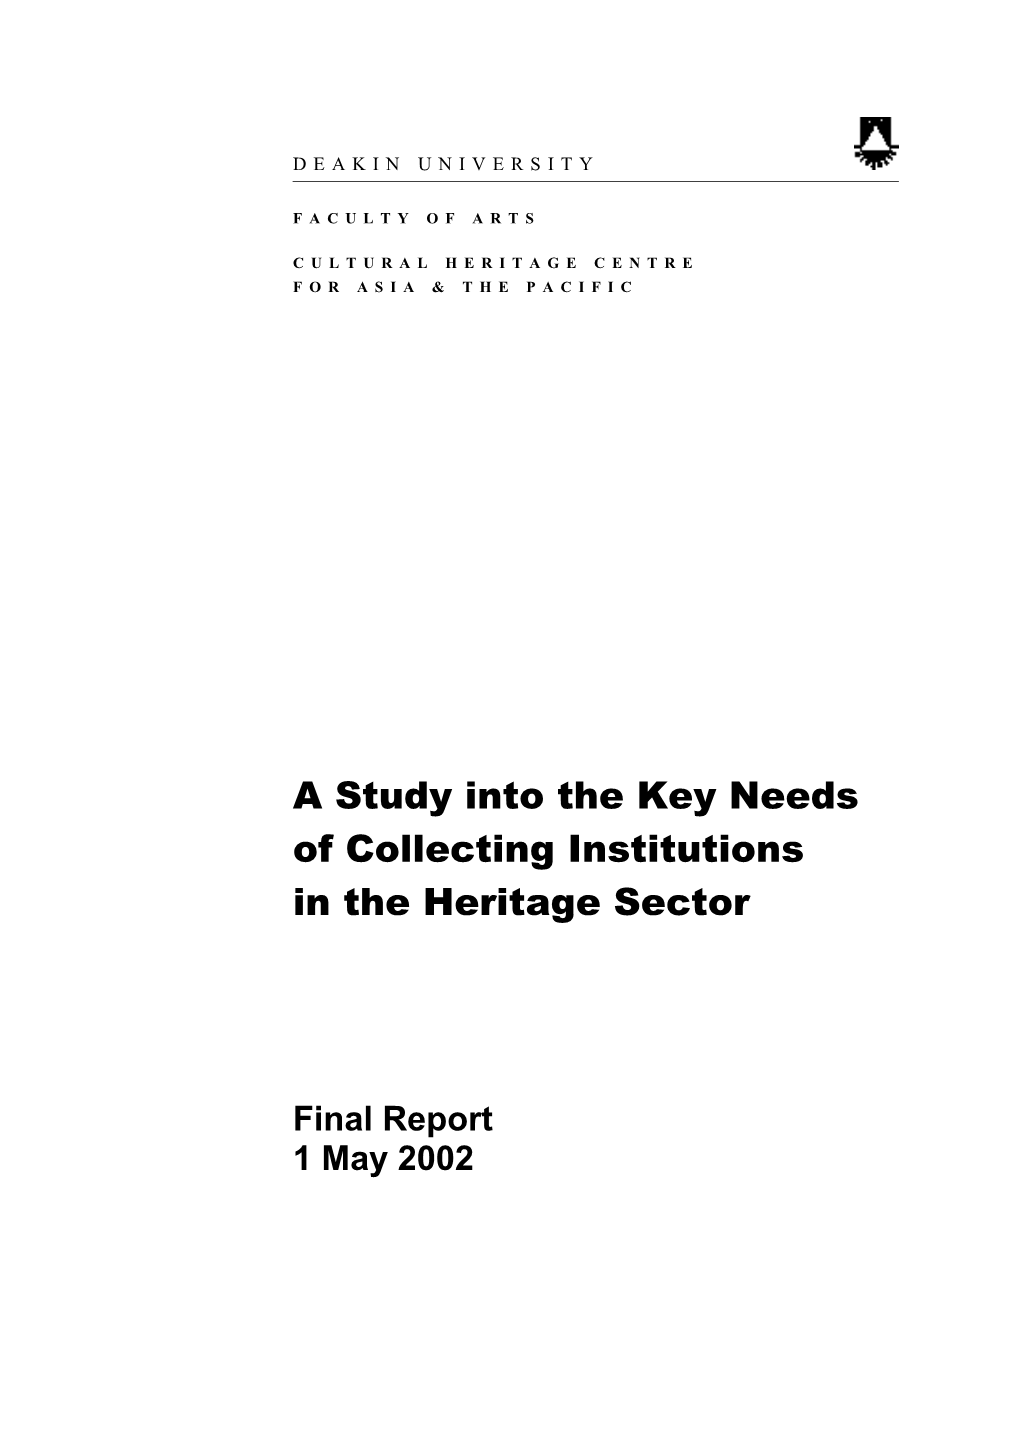 Key Needs of Heritage Collections, May 20021